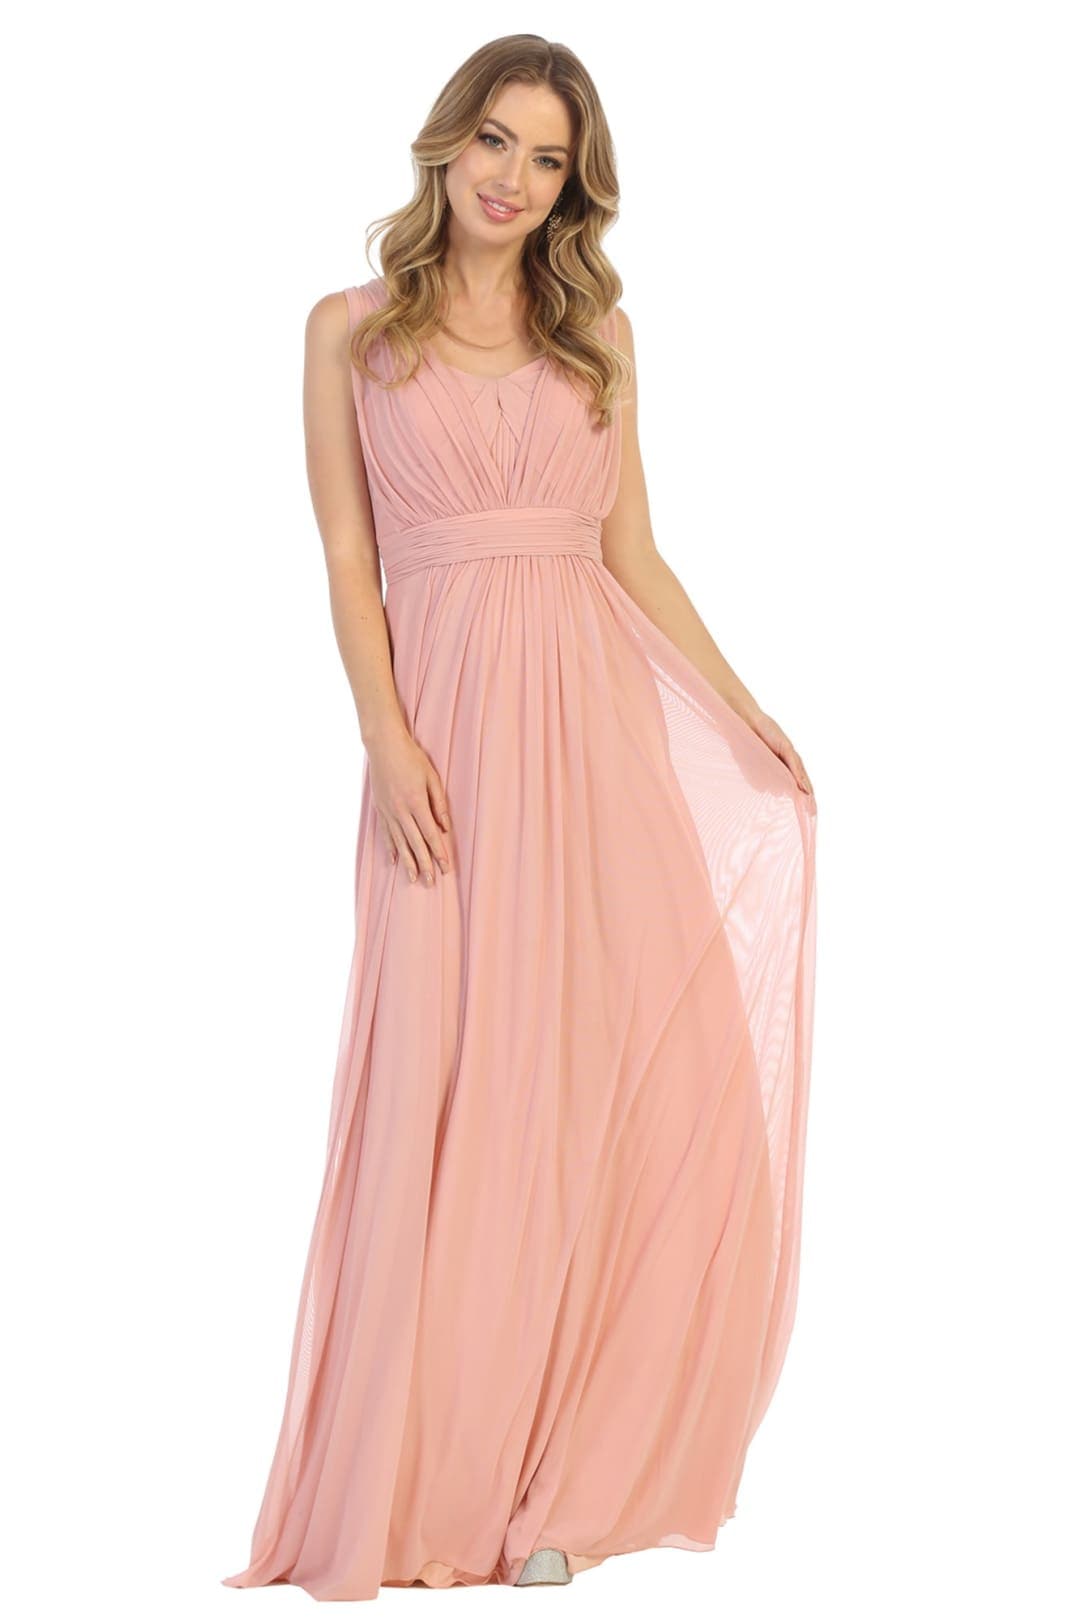 Classy Bridesmaids Long Simple Dress And Plus Size - DUSTY ROSE / 4